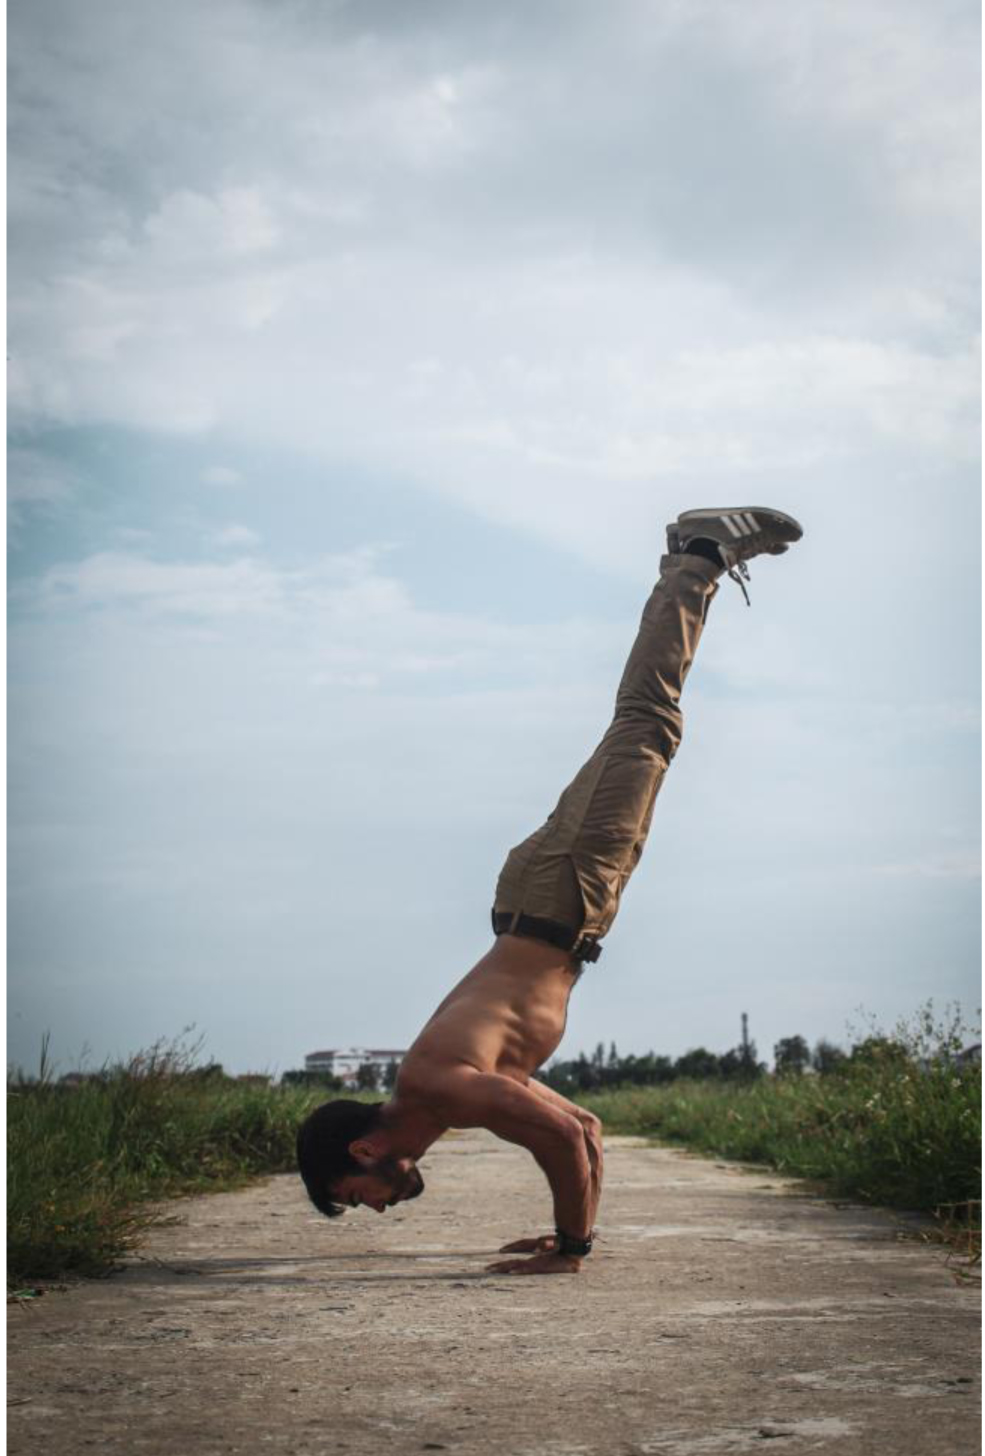 A man demonstrating calisthenics with a handstand on a road.